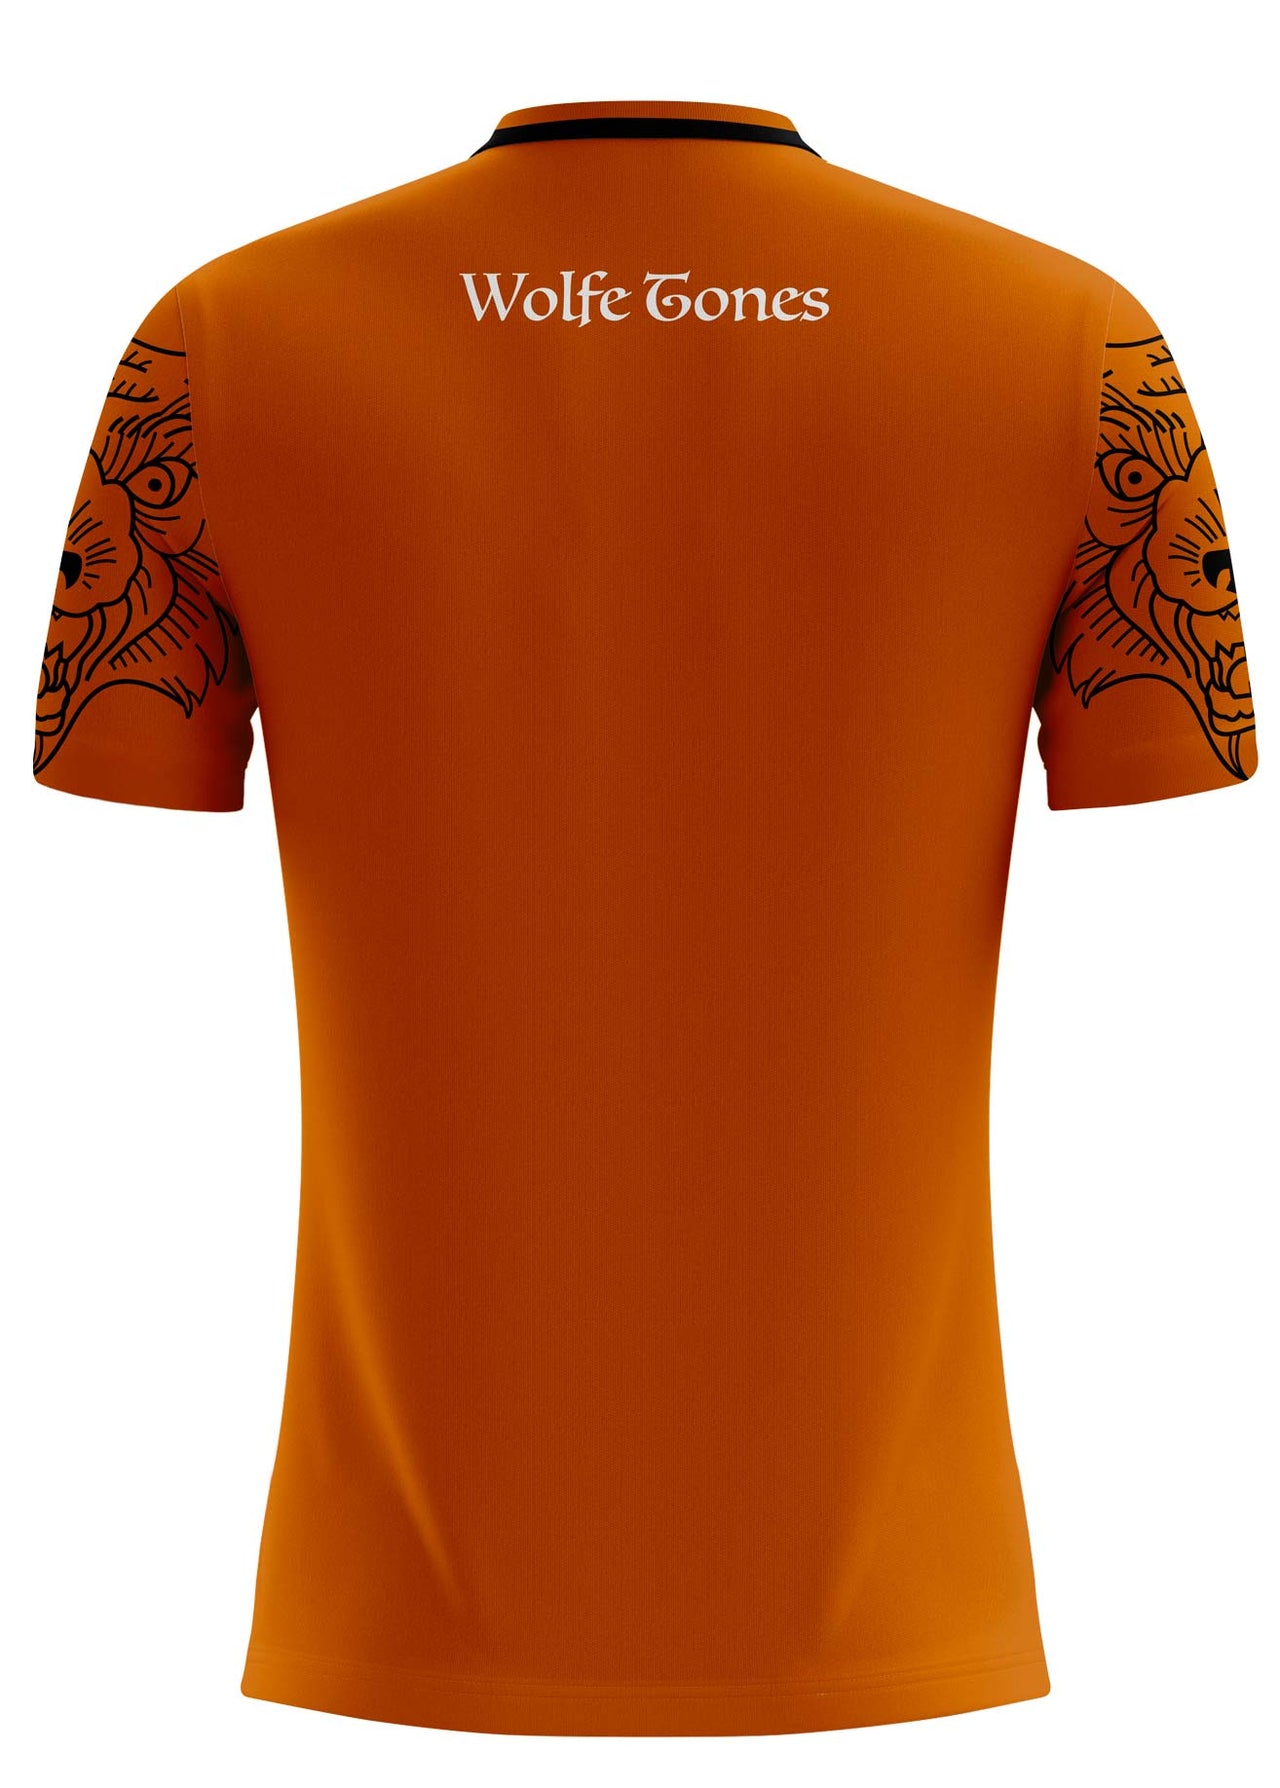 Montana Wolfe Tones Home Jersey Player Fit Adult